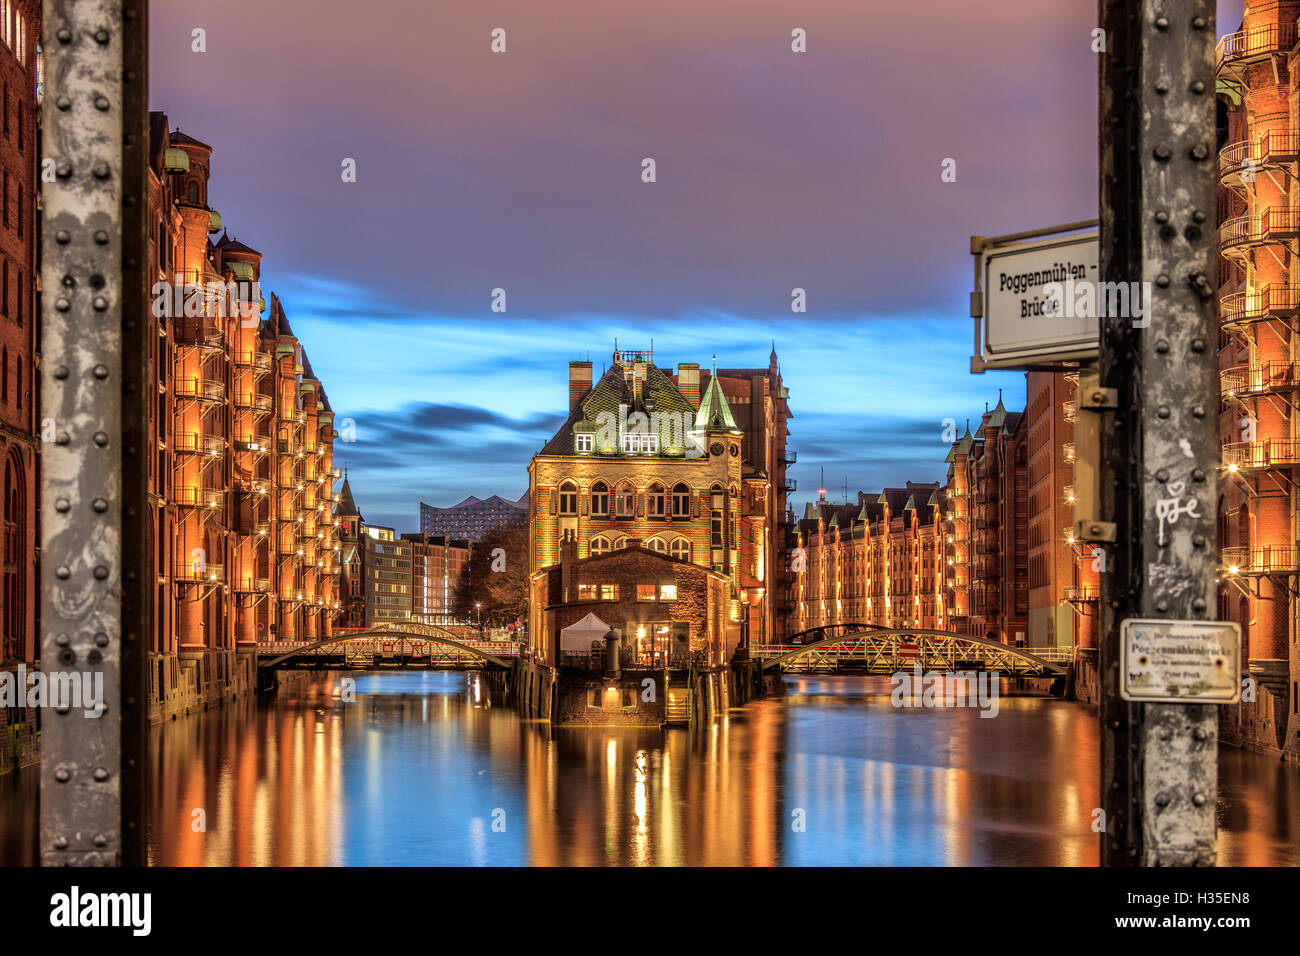 Blue dusk and lights are reflected in Poggenmohlenbrucke with water castle between bridges, Altstadt, Hamburg, Germany Stock Photo